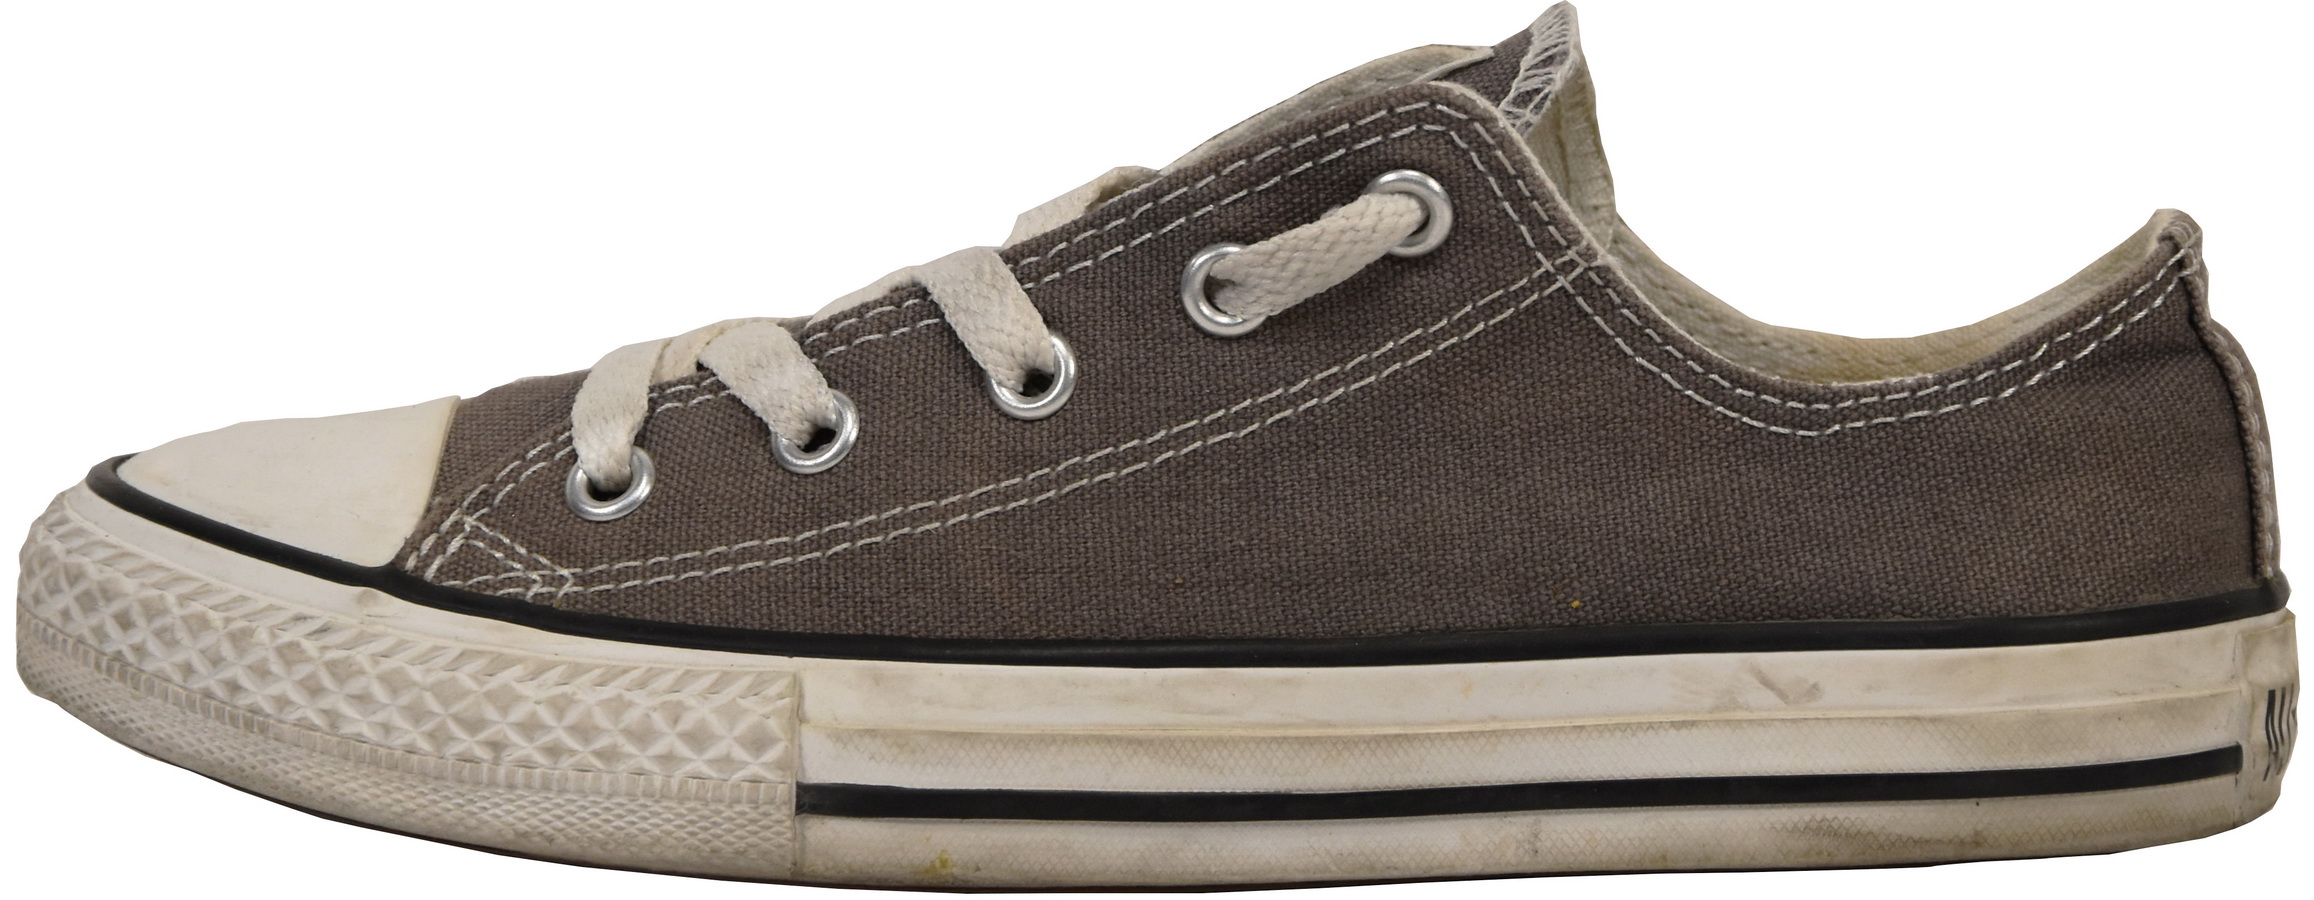 converse all star couleur taupe